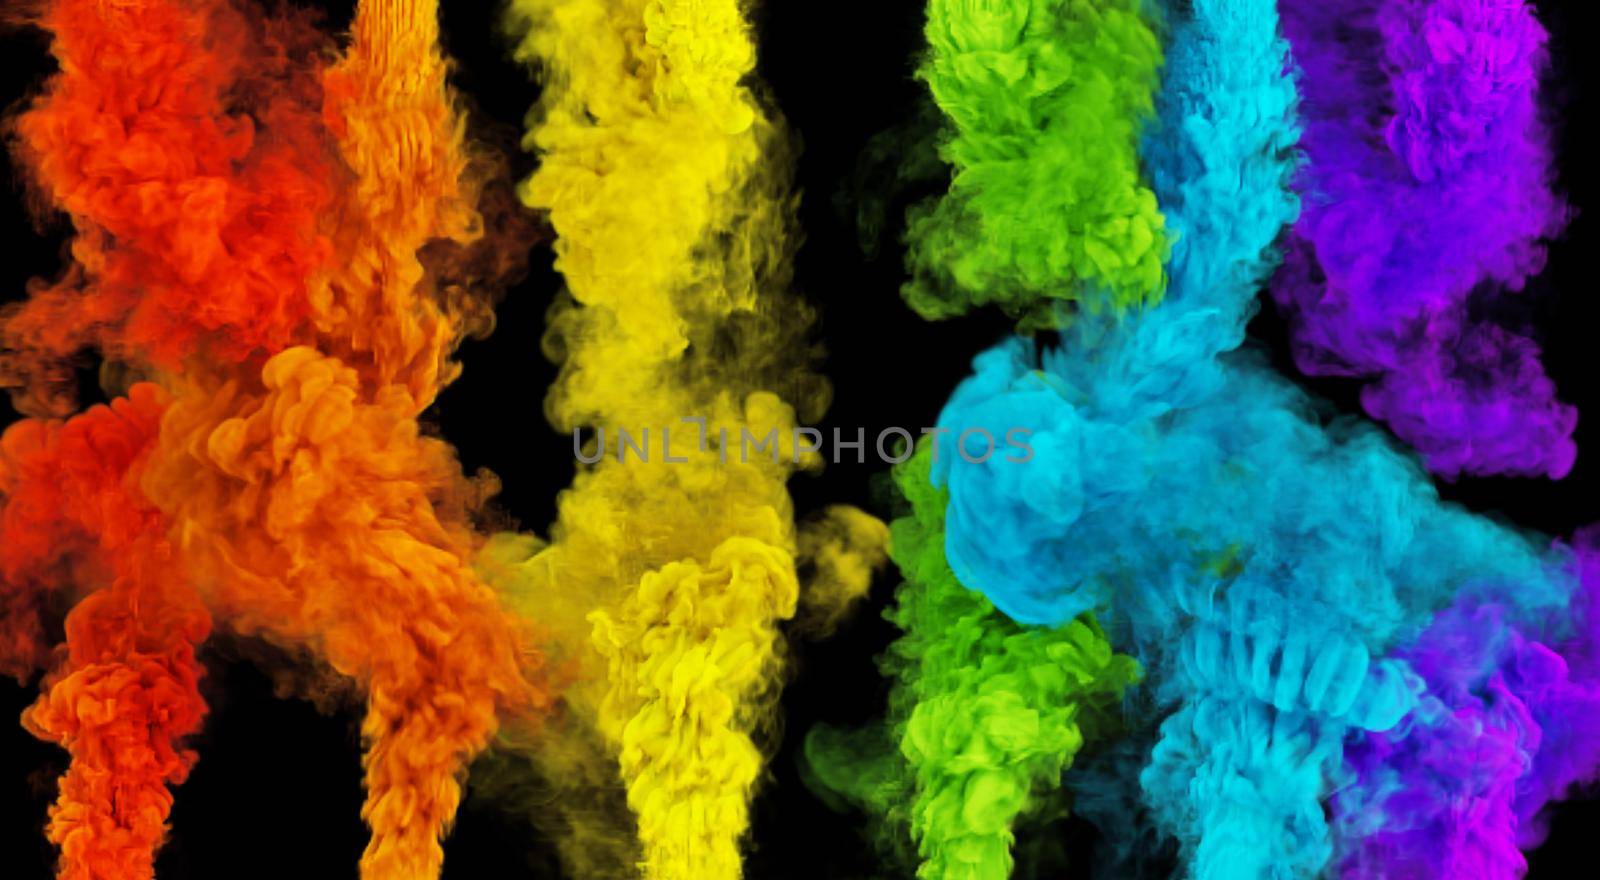 Magic smoke puffs of rainbow colors. Color 3D render abstract texture background.